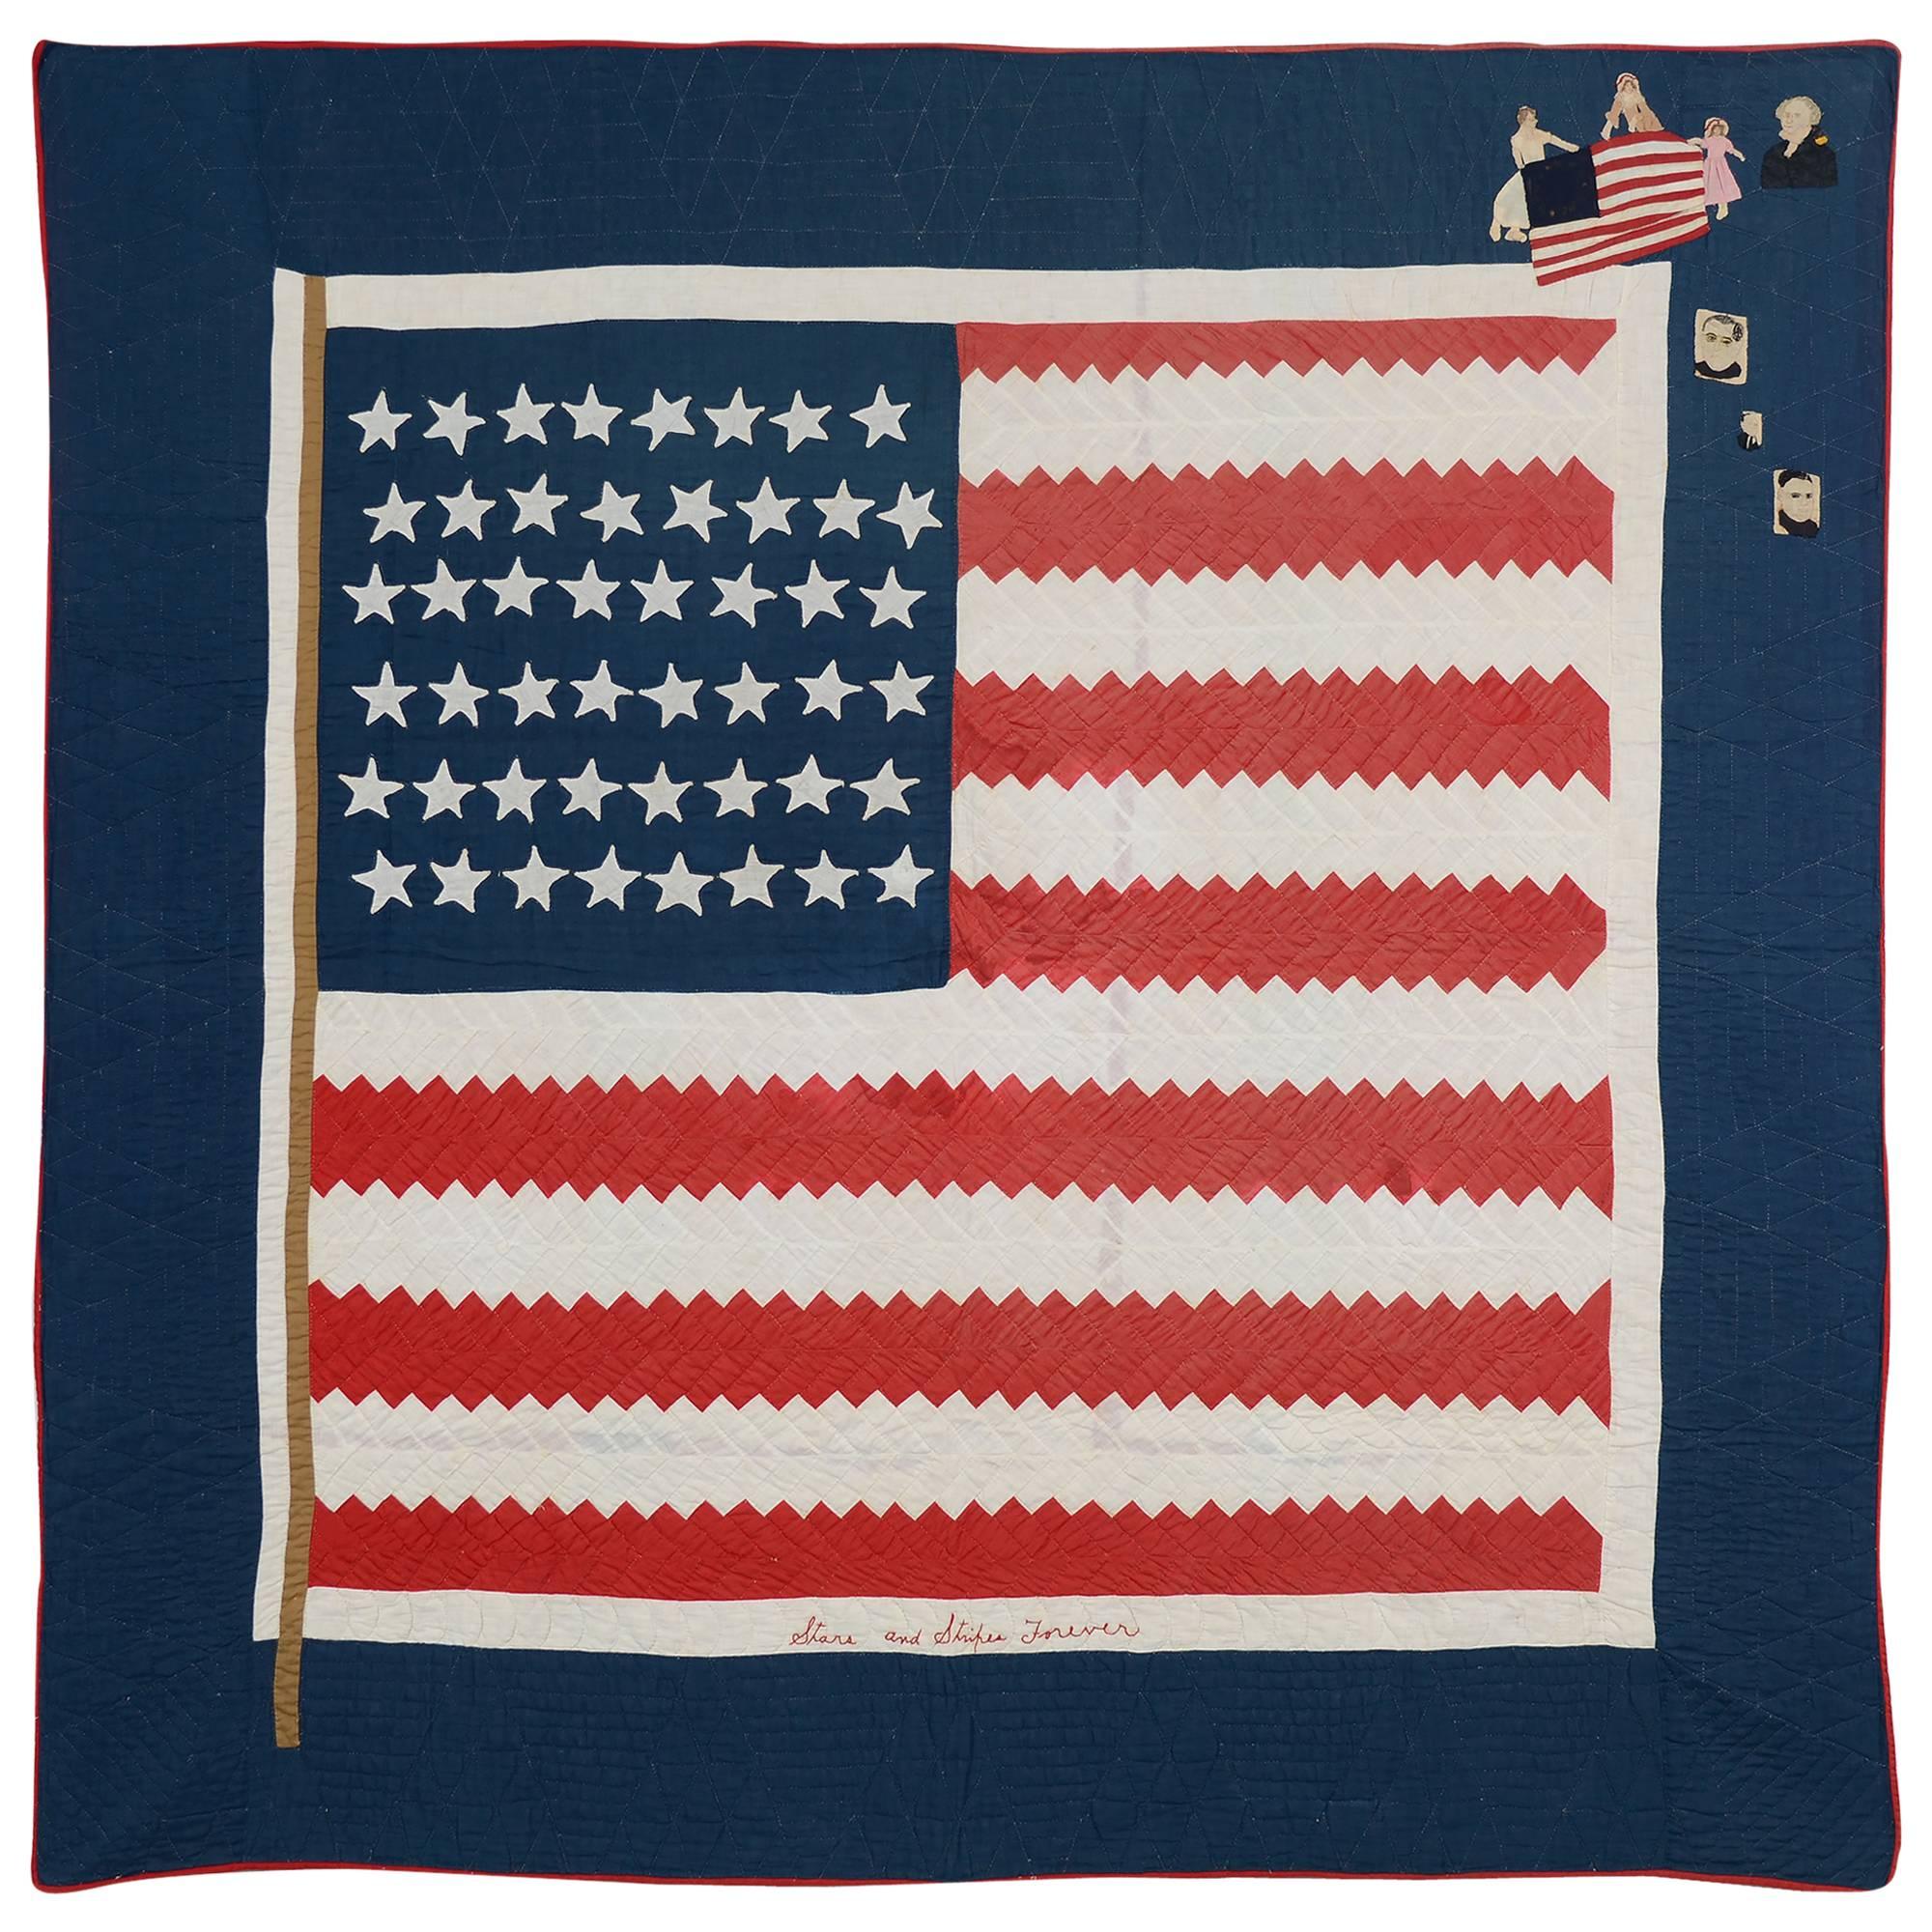 Patriotic Quilt Titled "Stars and Stripes" Forever For Sale